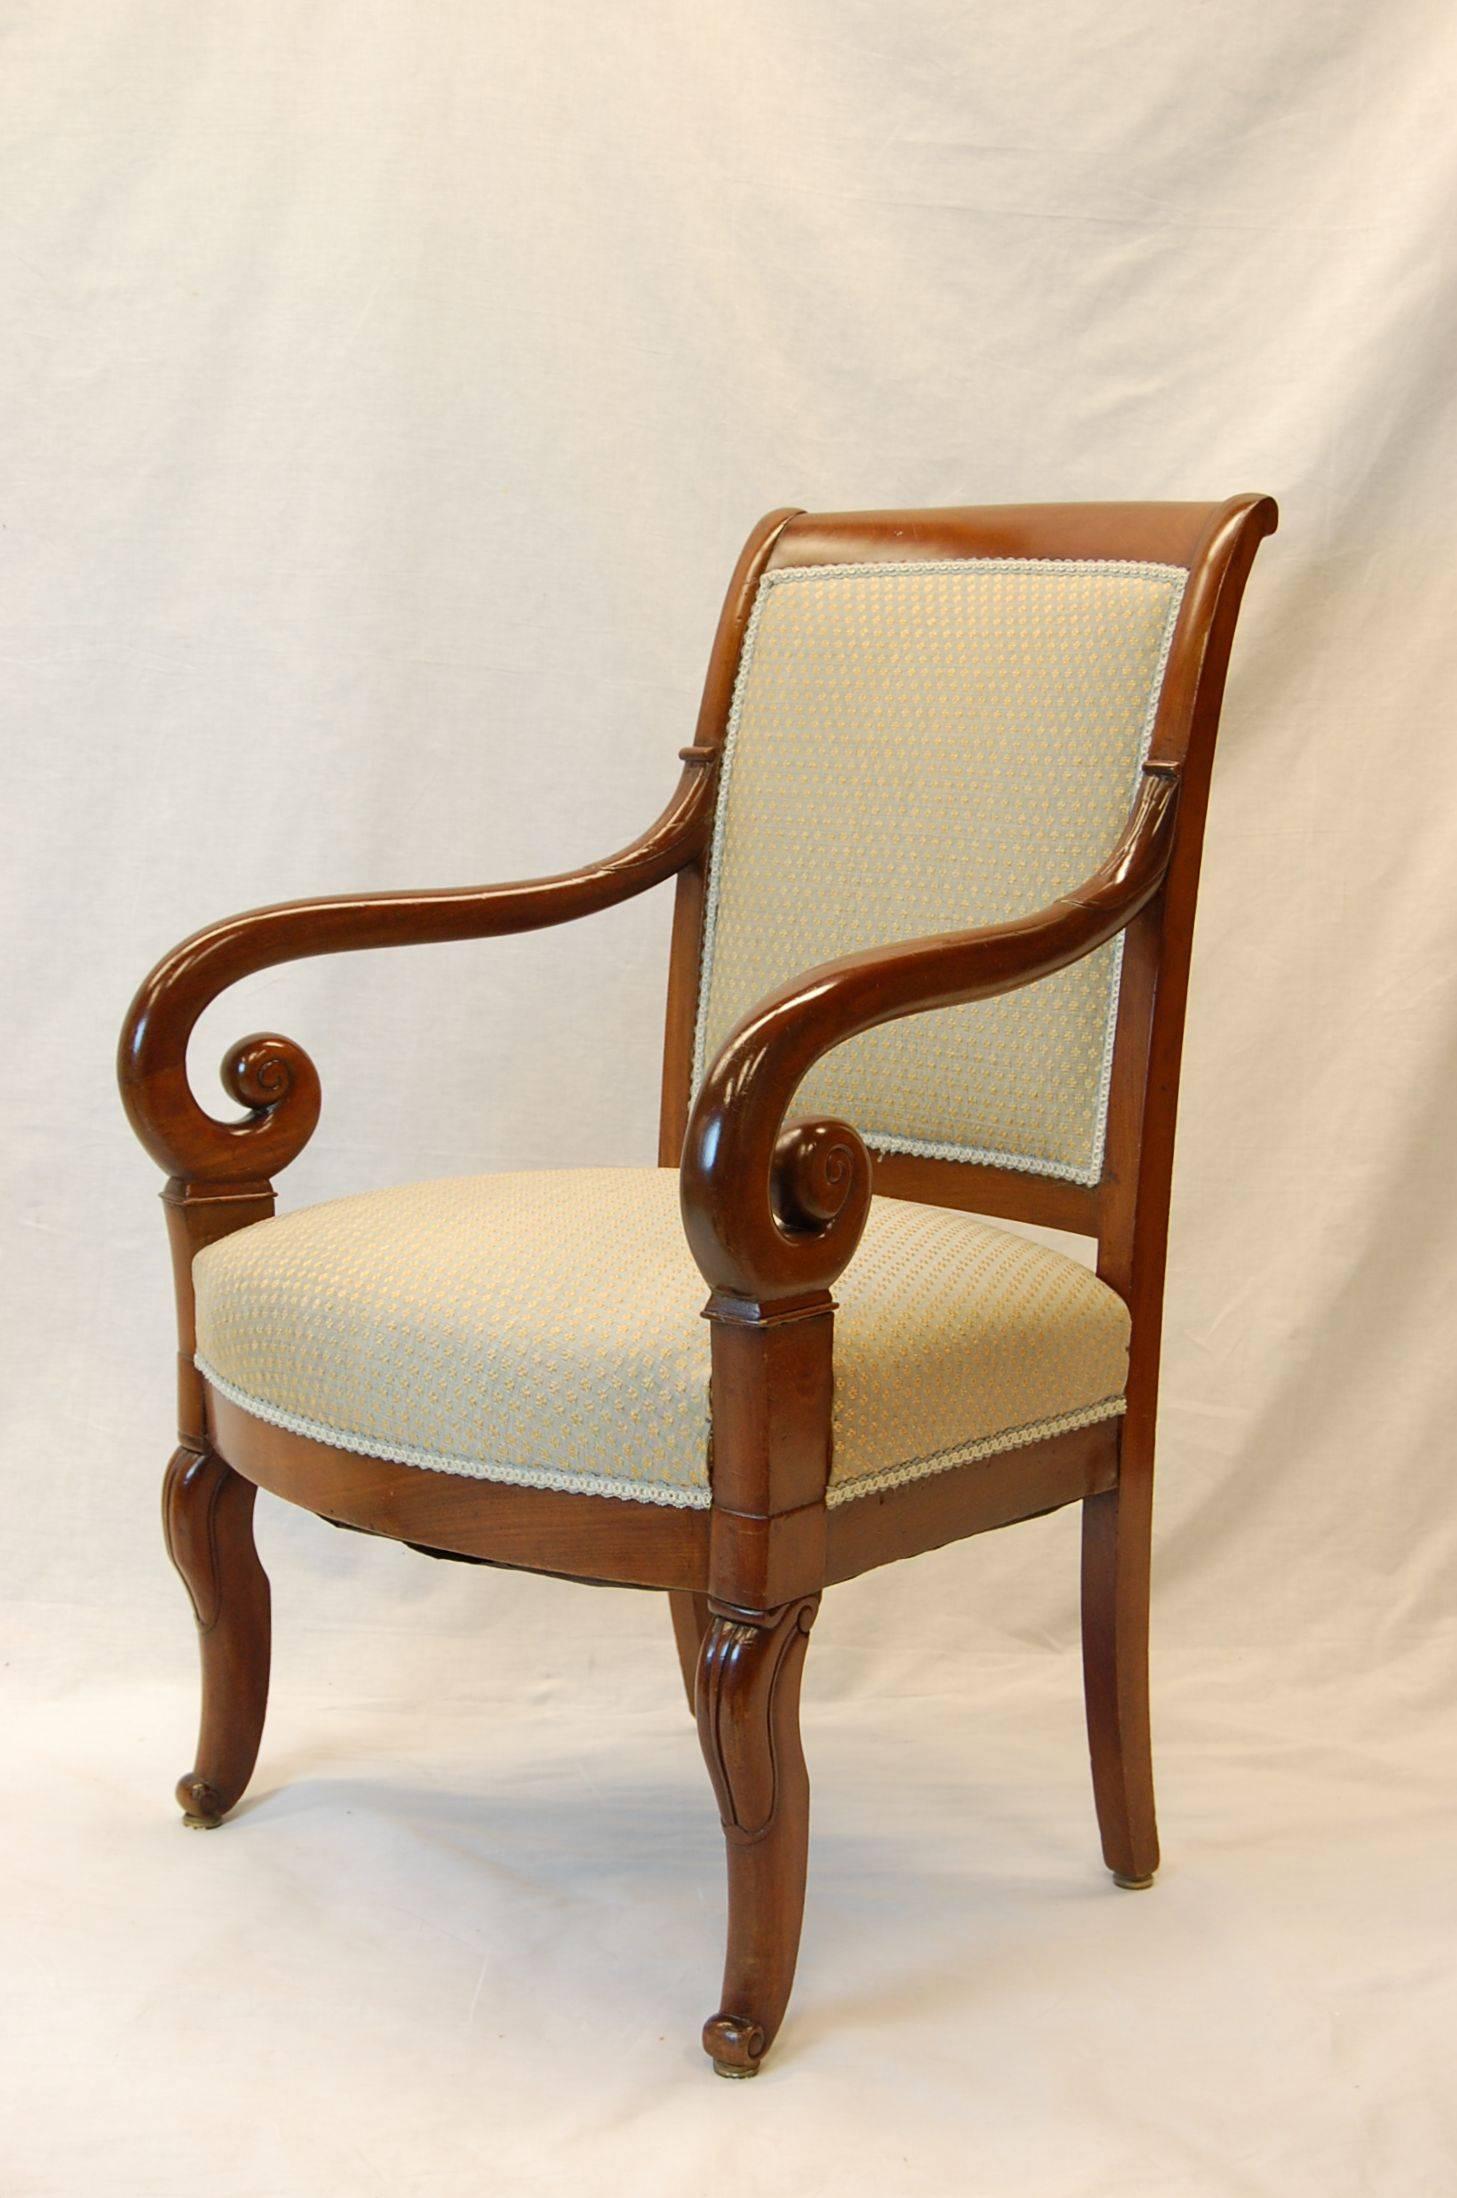 Pair of Carved Mahogany Restauration Period Armchairs, Early 19th Century For Sale 1